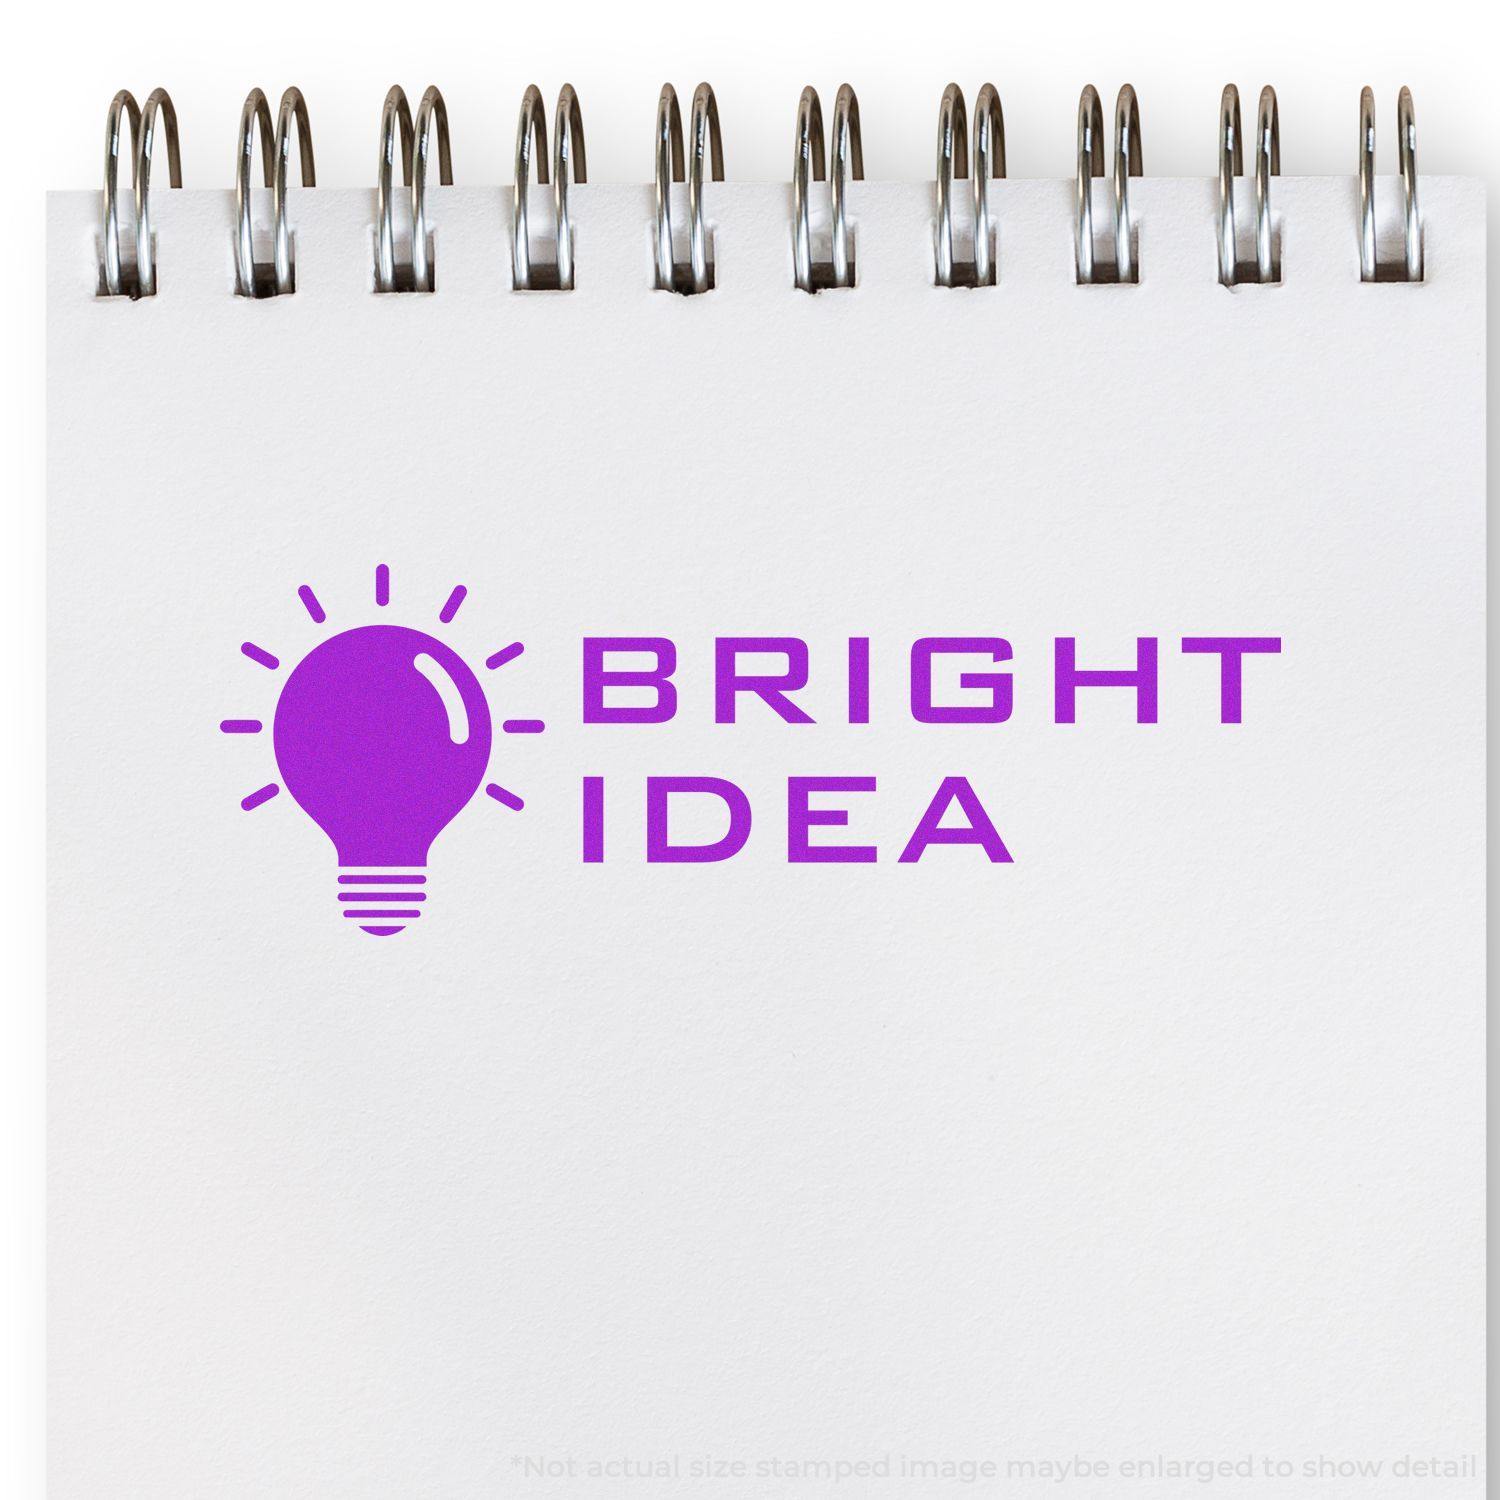 A self-inking stamp with a stamped image showing how the text "BRIGHT IDEA" in a tech-style font with an image of a bright lightbulb on the left side of the text is displayed after stamping.